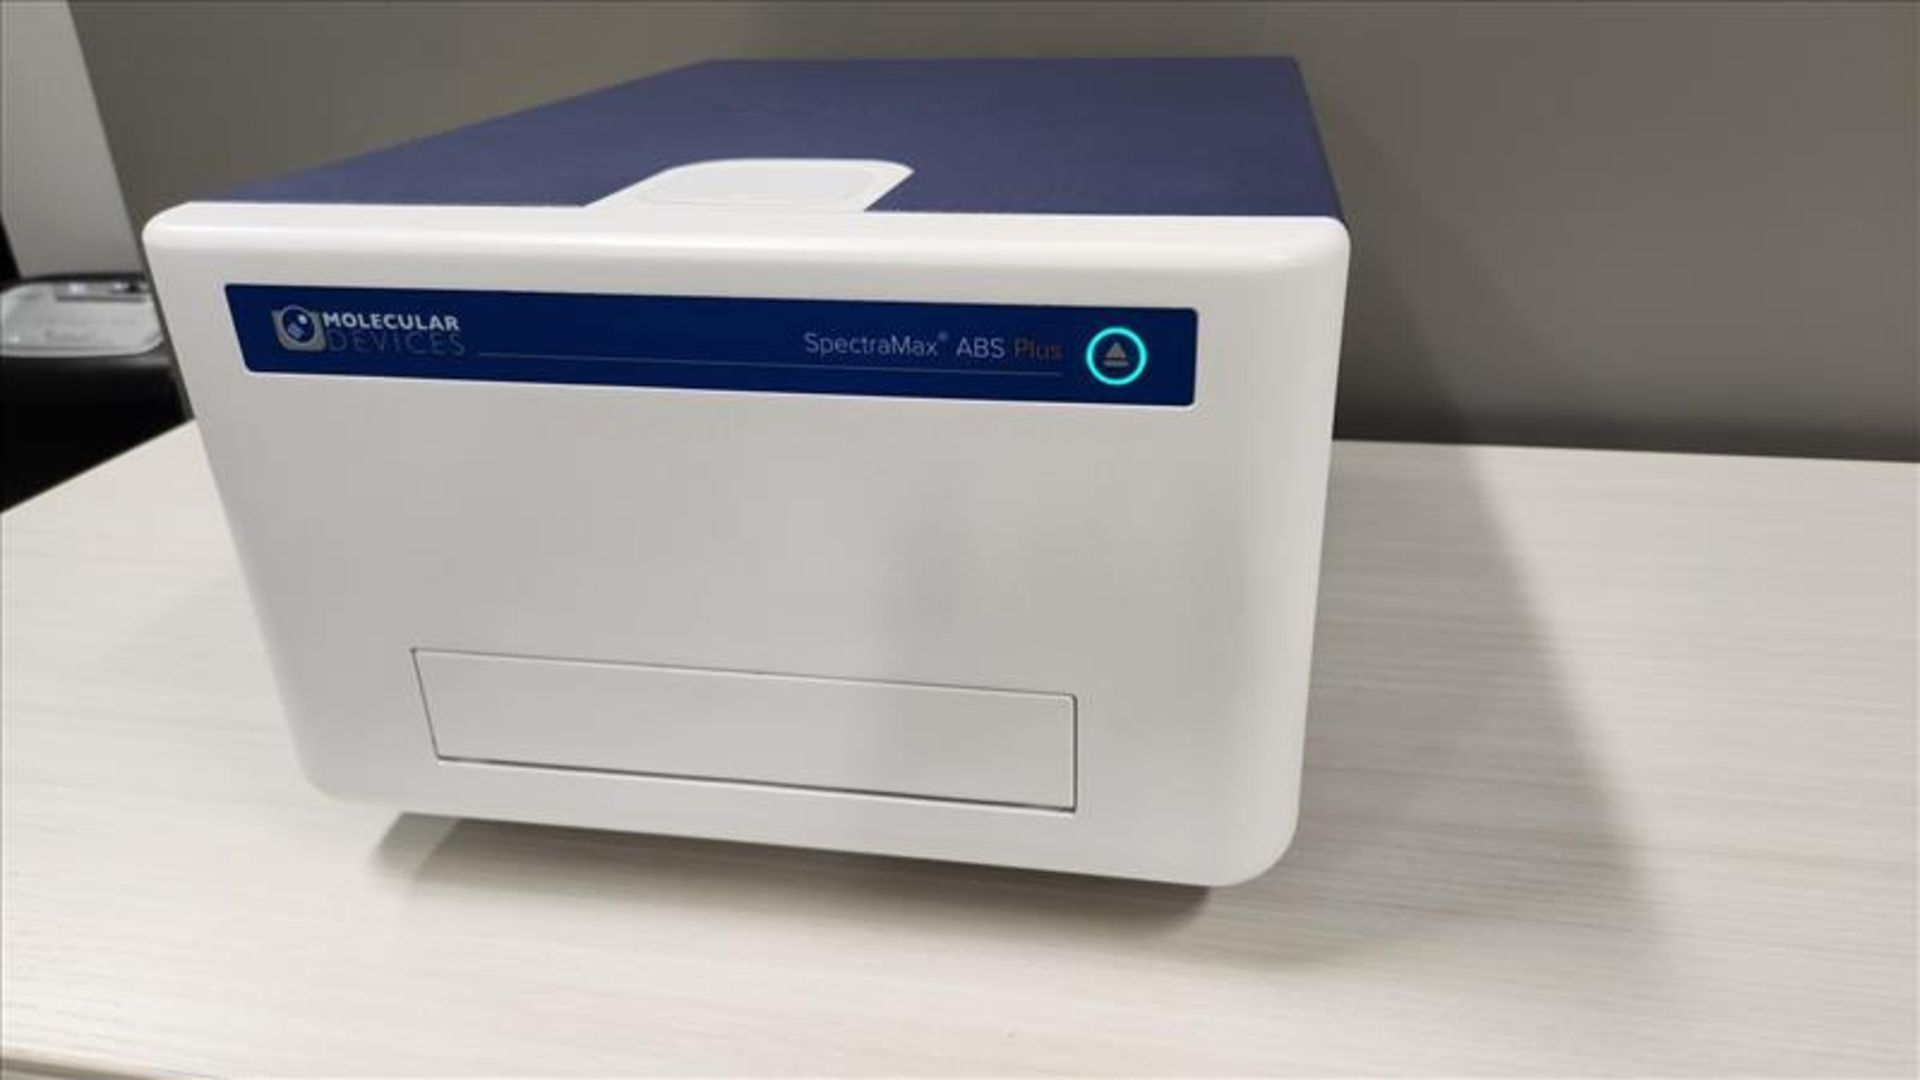 Molecular Devices SpectraMax ABS Plus Absorbance Microplate Reader, S/N ABP01300 with SoftMax Pro - Image 7 of 15